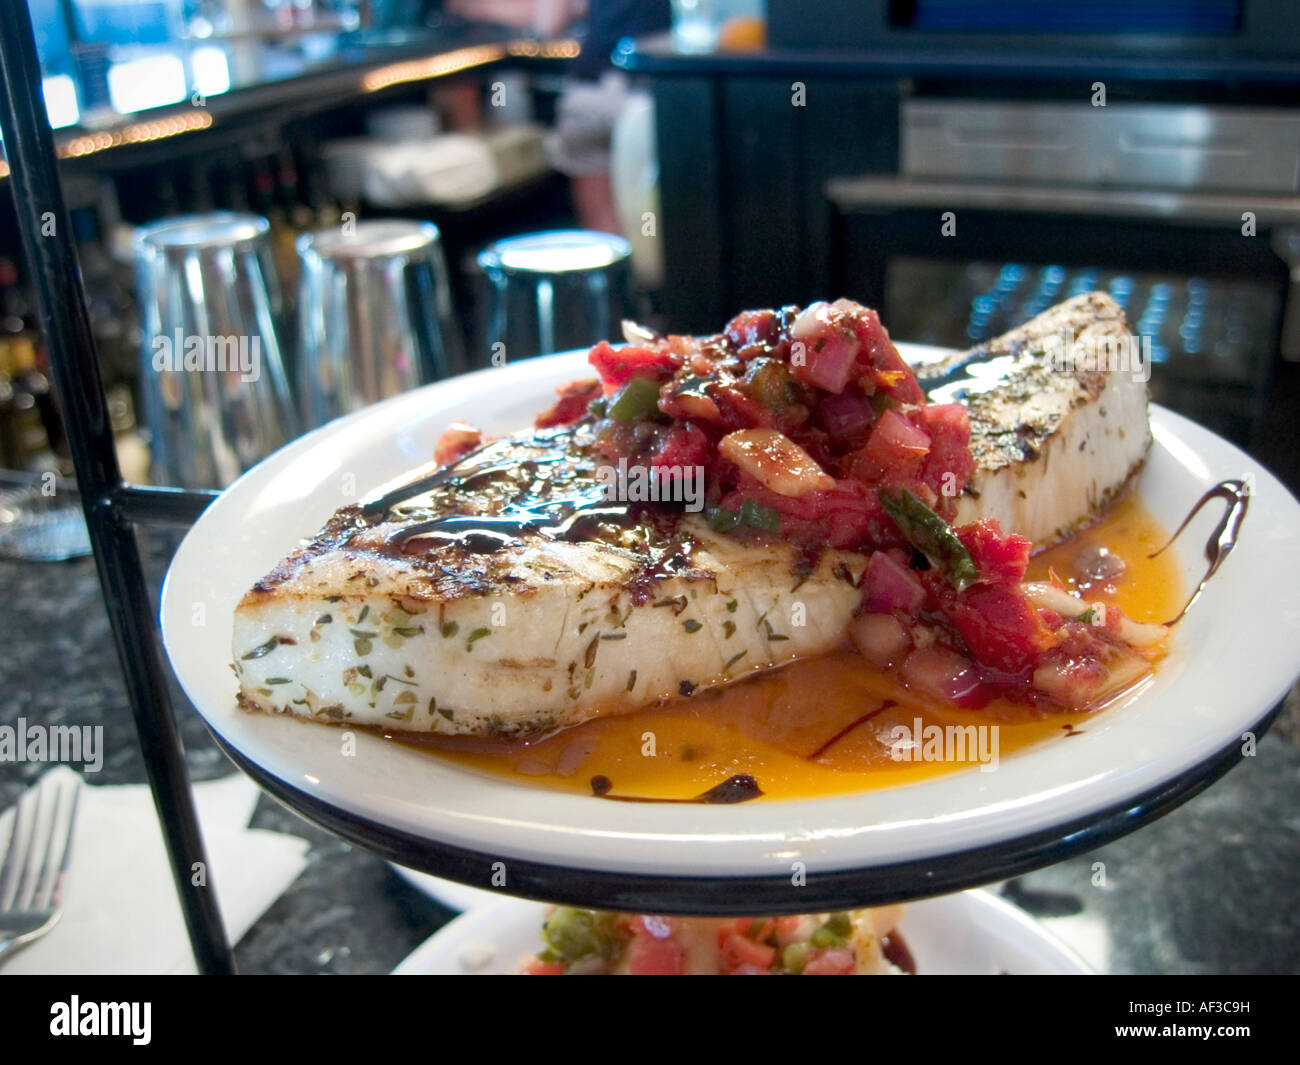 Gourmet presentation of a nice fillet of fish with chutney. Stock Photo